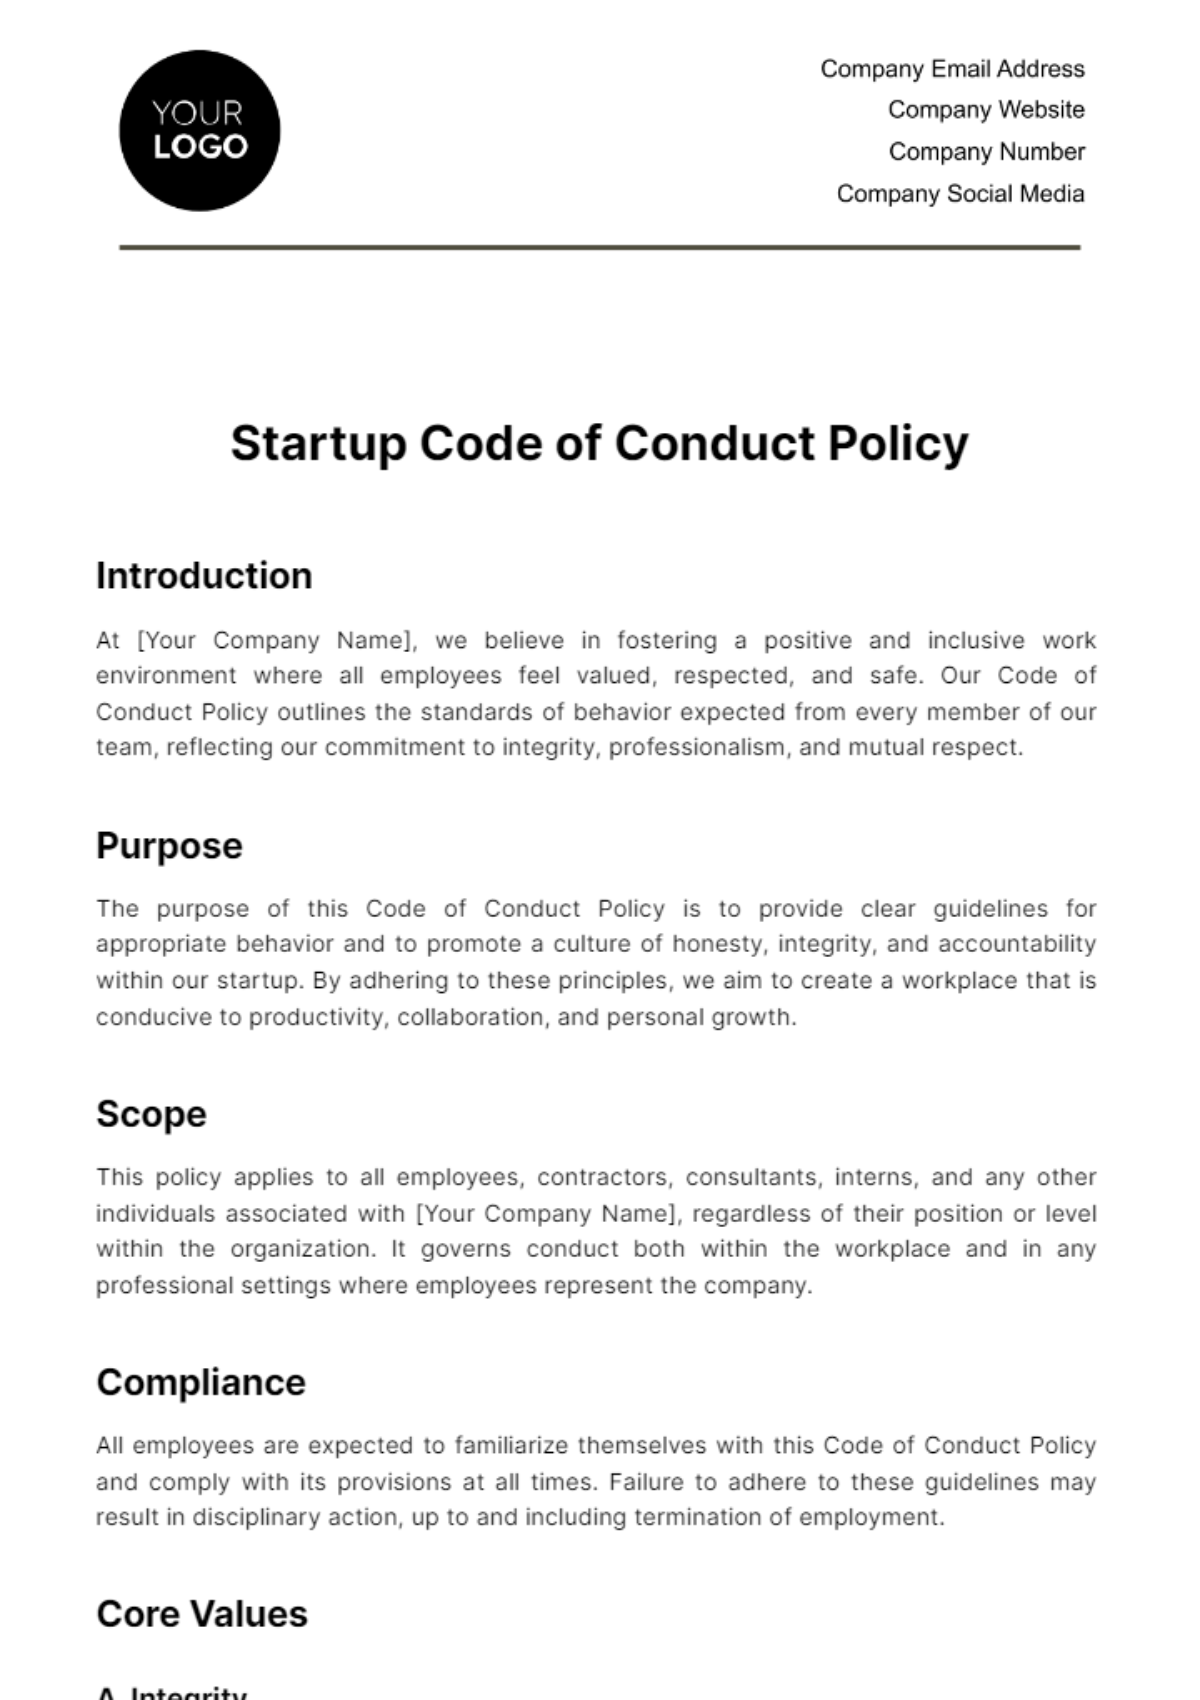 Free Startup Code of Conduct Policy Template